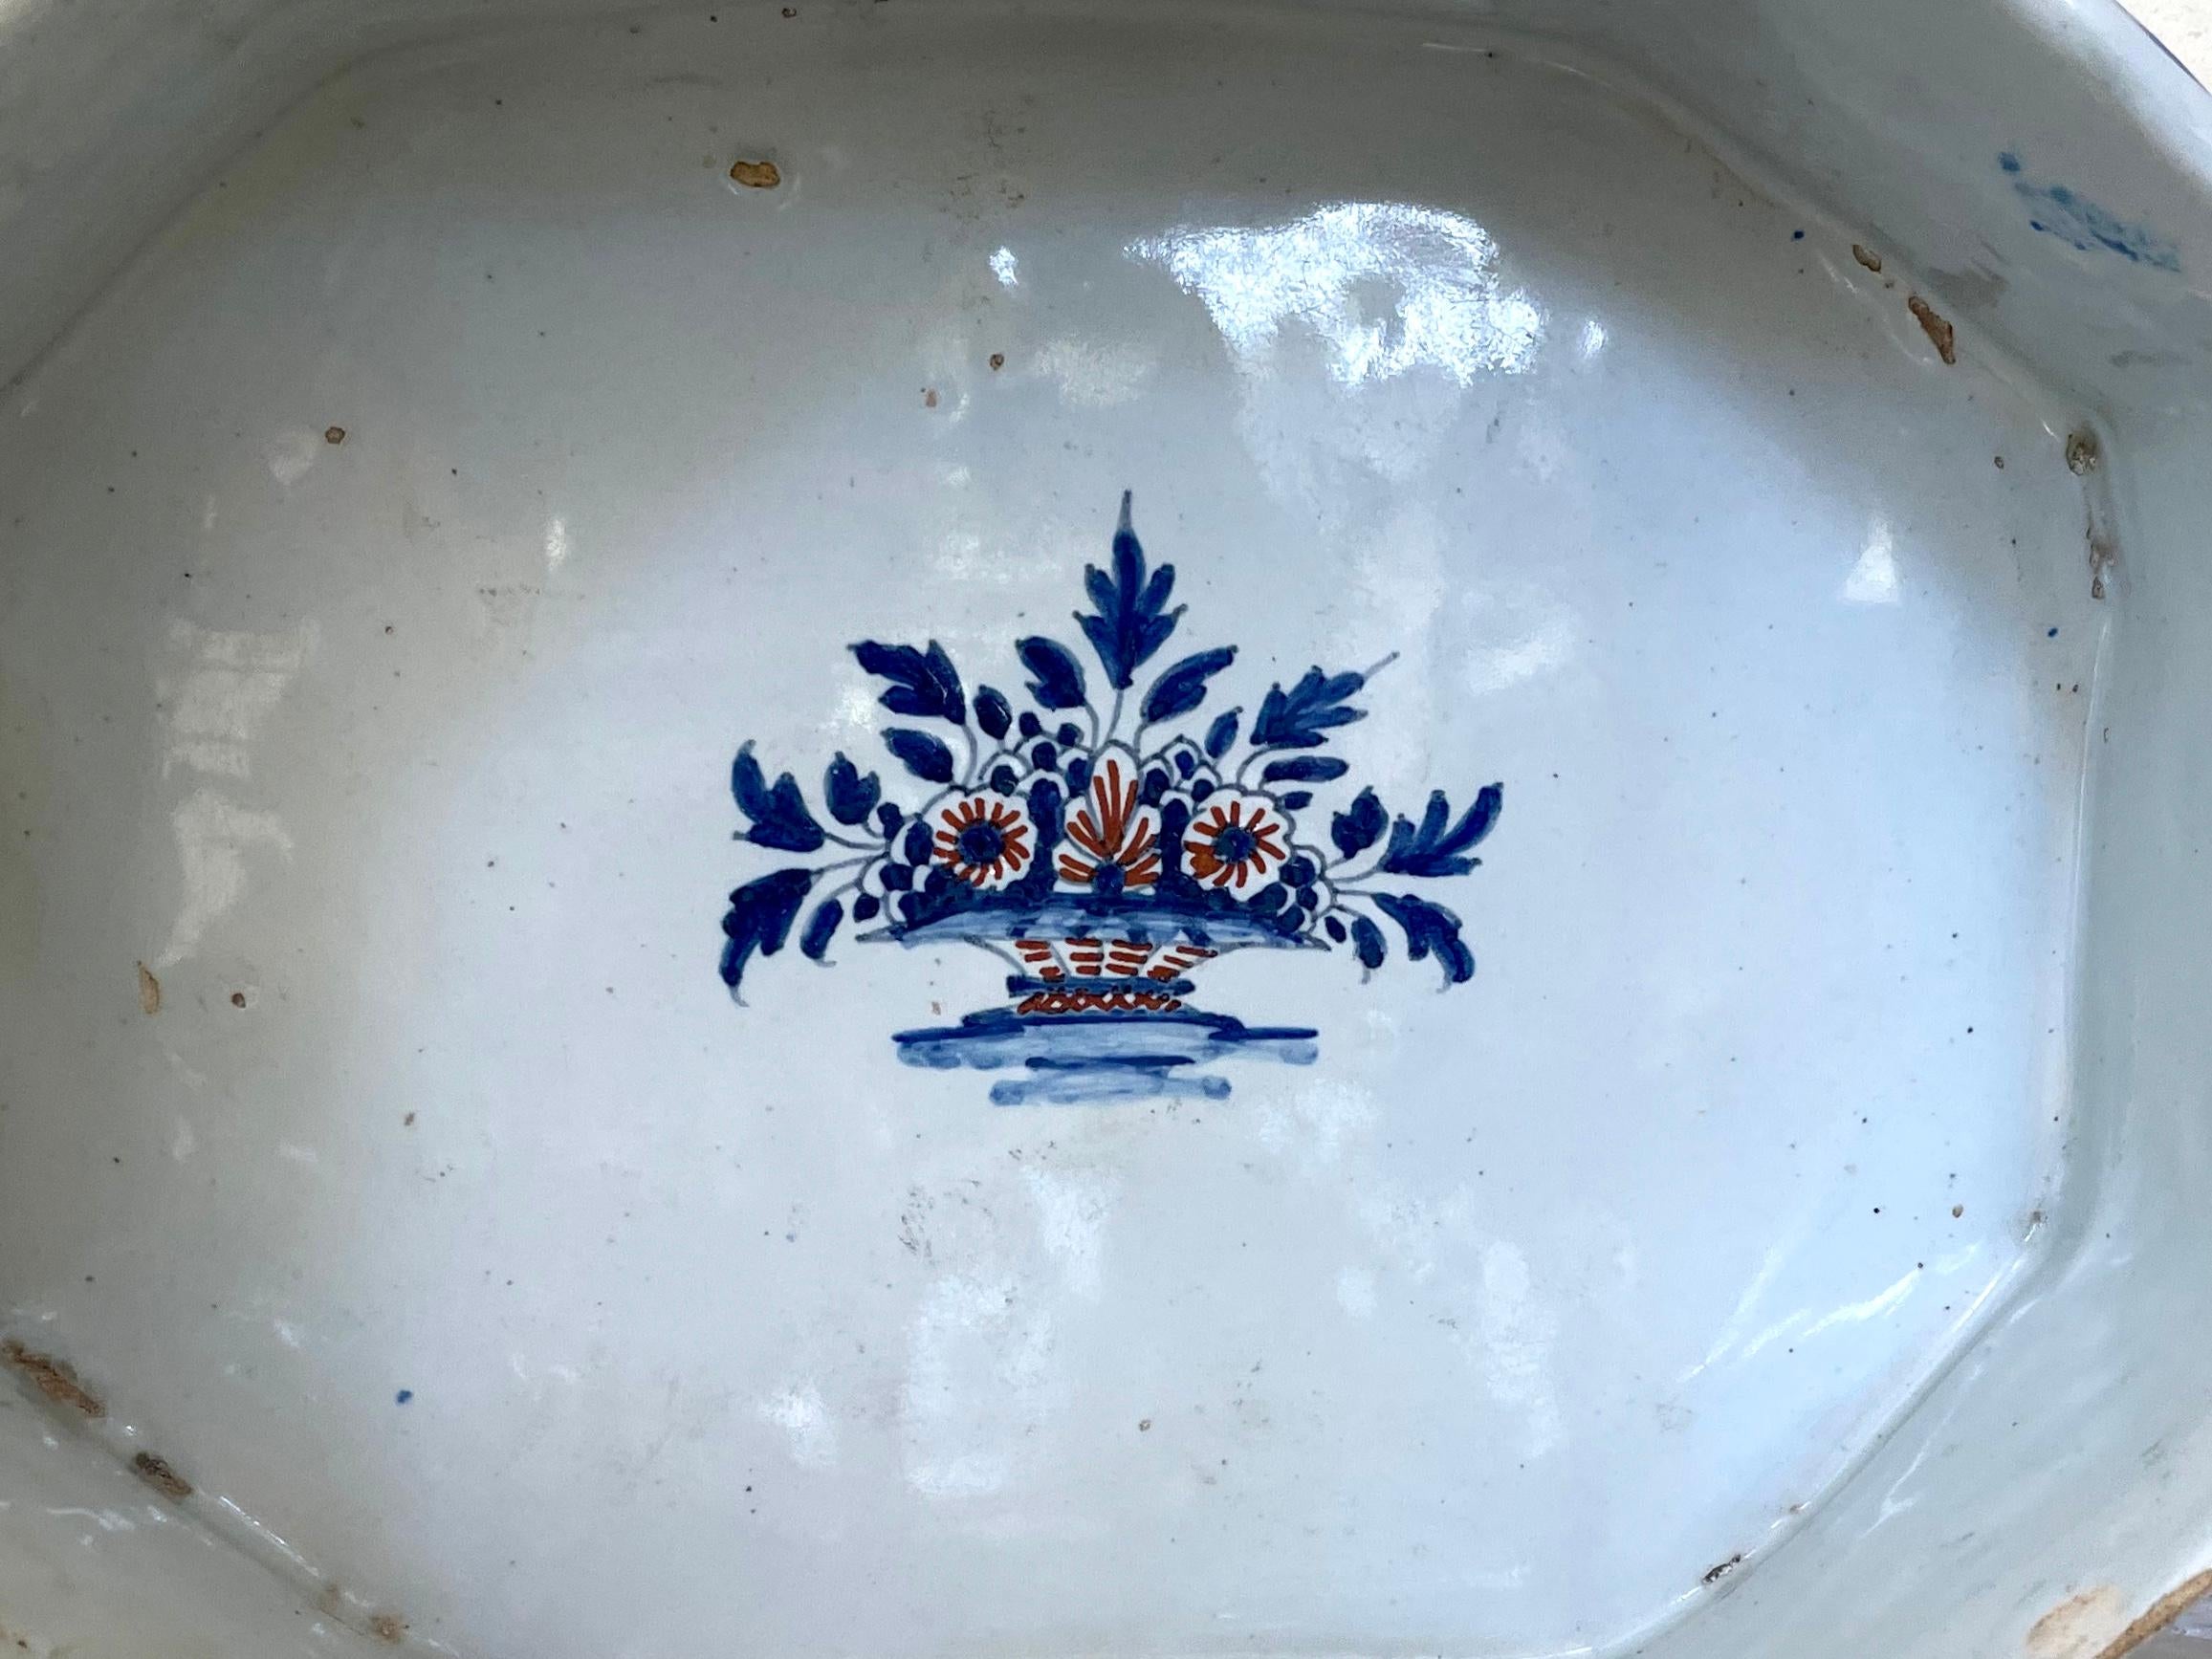 Blue and white glazed French terracotta compote. Antique low handled fruit basket compote serving piece with blue and iron red floral sprays, diapering and central floral basket all raised on three small feet. France, late 18th century.